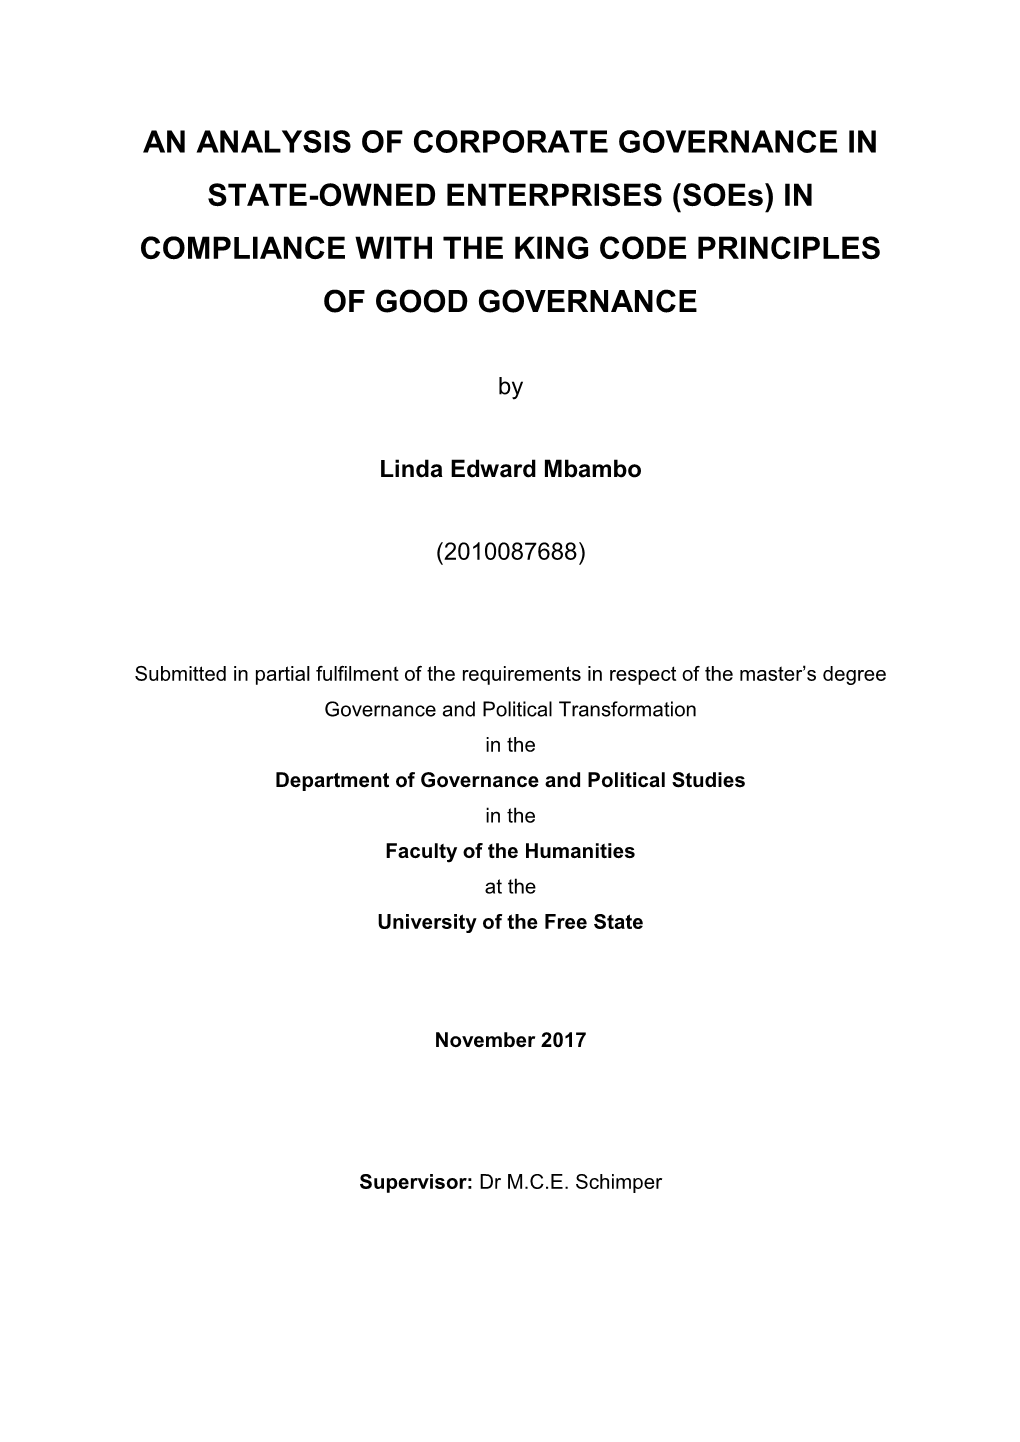 AN ANALYSIS of CORPORATE GOVERNANCE in STATE-OWNED ENTERPRISES (Soes) in COMPLIANCE with the KING CODE PRINCIPLES of GOOD GOVERNANCE